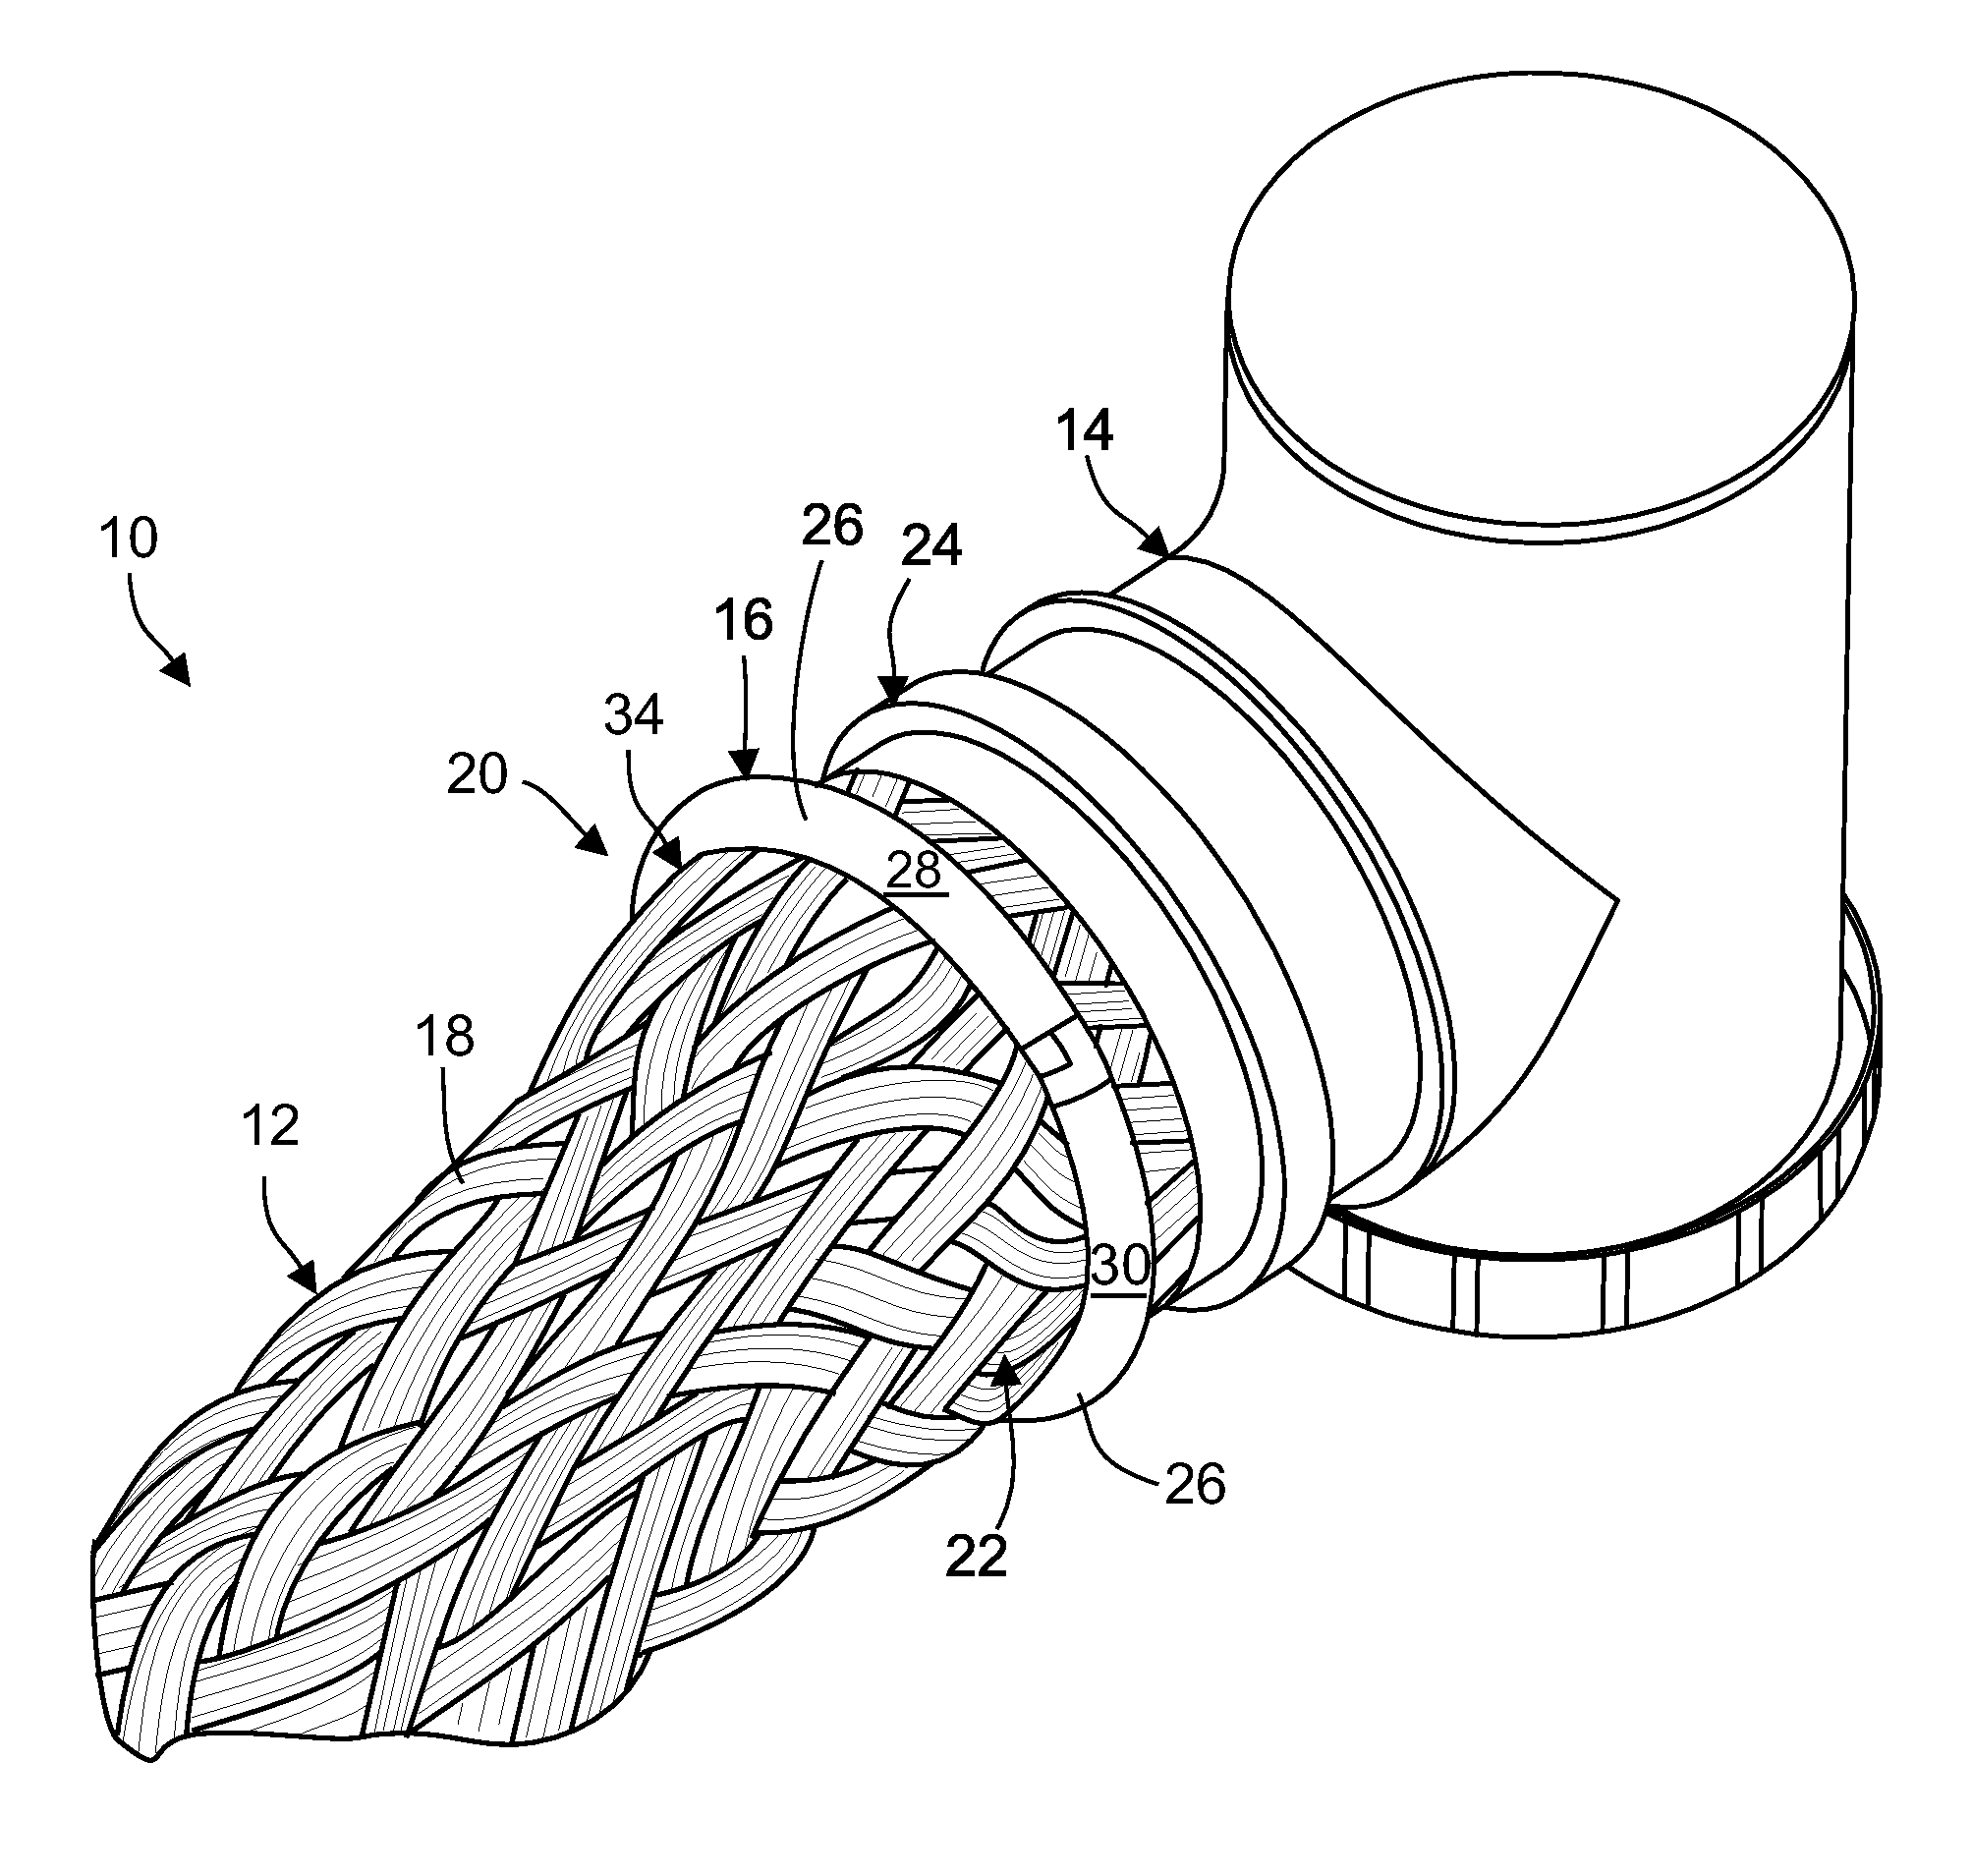 Attachment Ring for Attaching a Shield of an Electrical Cable to a Backshell